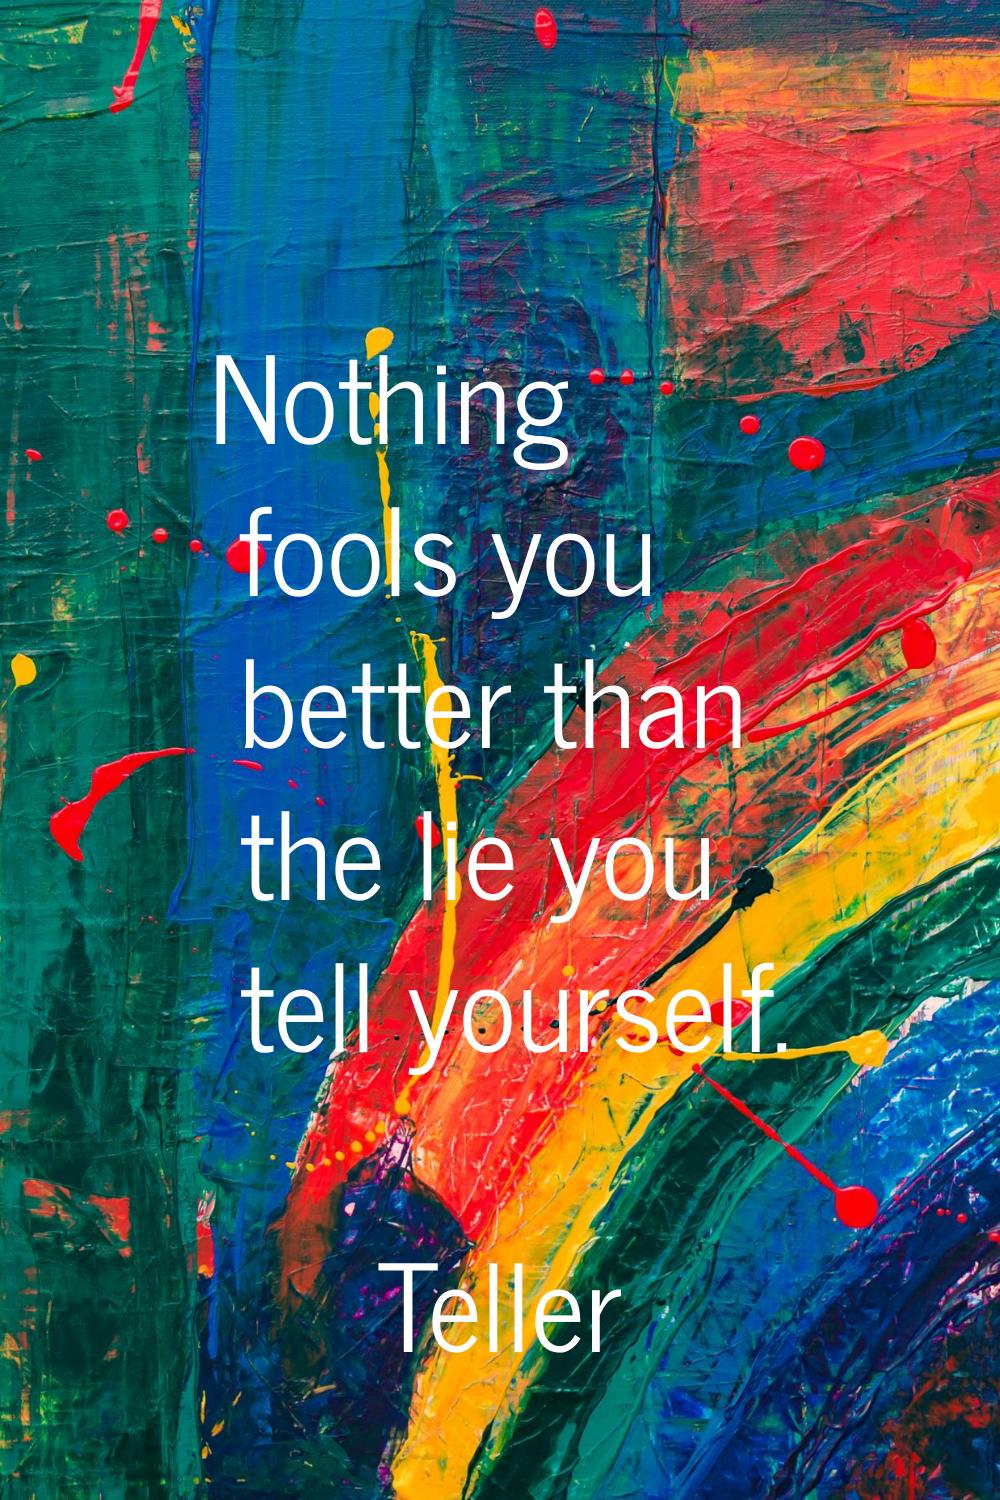 Nothing fools you better than the lie you tell yourself.